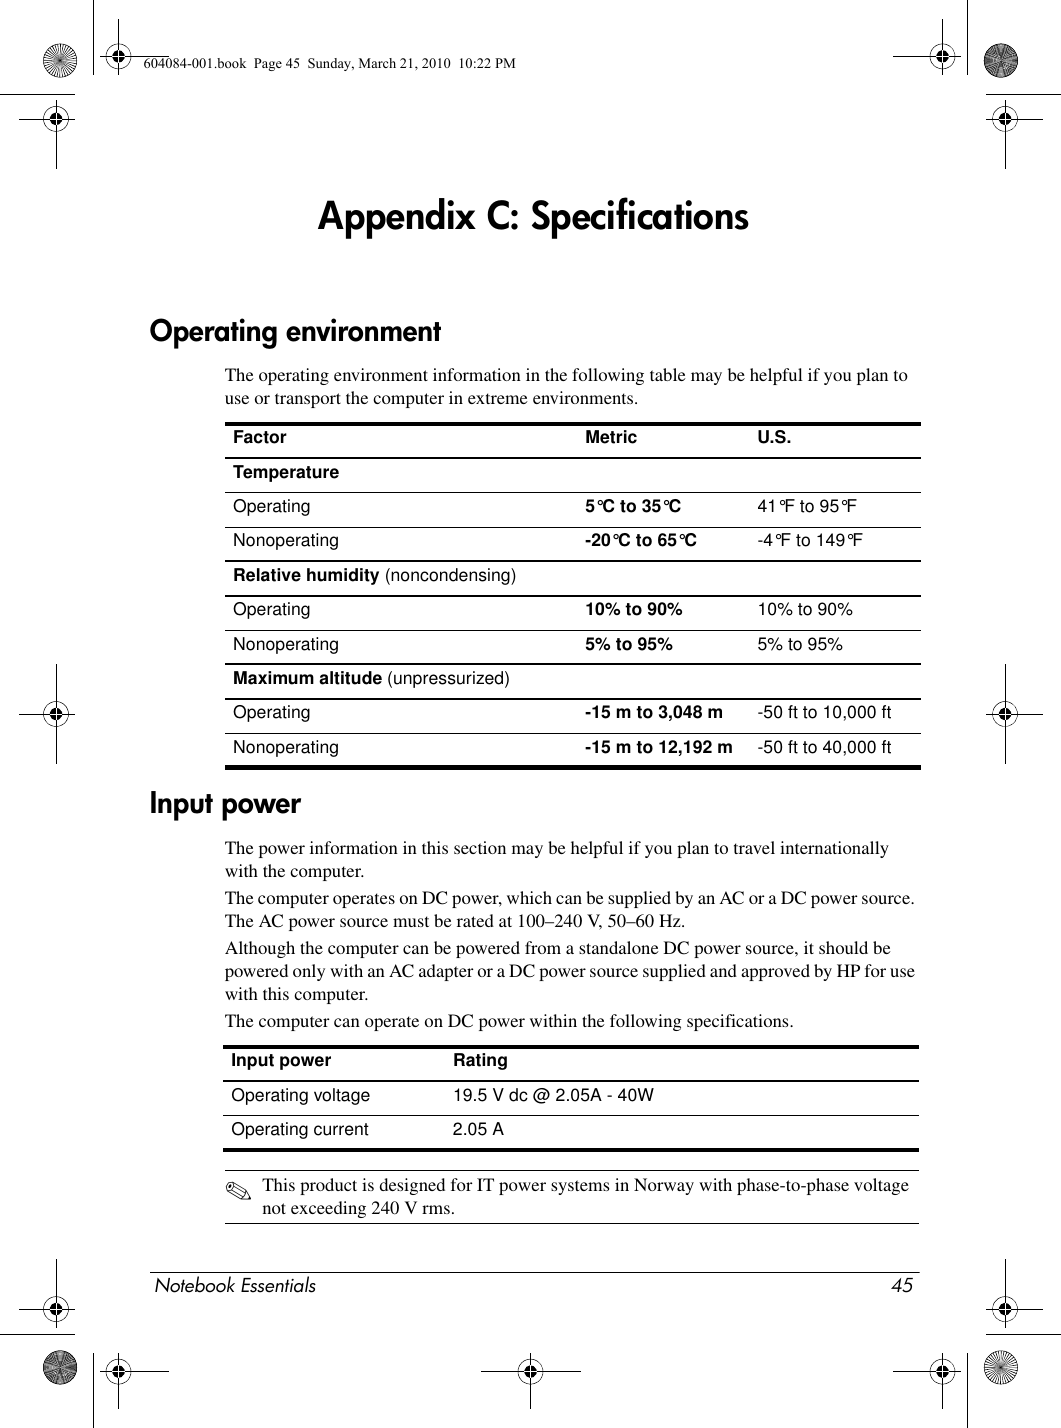 Notebook Essentials 45Appendix C: SpecificationsThe operating environment information in the following table may be helpful if you plan to use or transport the computer in extreme environments.The power information in this section may be helpful if you plan to travel internationally with the computer.The computer operates on DC power, which can be supplied by an AC or a DC power source. The AC power source must be rated at 100–240 V, 50–60 Hz.Although the computer can be powered from a standalone DC power source, it should be powered only with an AC adapter or a DC power source supplied and approved by HP for use with this computer.The computer can operate on DC power within the following specifications.✎This product is designed for IT power systems in Norway with phase-to-phase voltage not exceeding 240 V rms.Operating environmentFactor Metric U.S.TemperatureOperating  5°C to 35°C 41°F to 95°FNonoperating -20°C to 65°C -4°F to 149°FRelative humidity (noncondensing)Operating 10% to 90% 10% to 90%Nonoperating 5% to 95% 5% to 95%Maximum altitude (unpressurized)Operating -15 m to 3,048 m -50 ft to 10,000 ftNonoperating -15 m to 12,192 m -50 ft to 40,000 ftInput powerInput power RatingOperating voltage 19.5 V dc @ 2.05A - 40W Operating current 2.05 A 604084-001.book  Page 45  Sunday, March 21, 2010  10:22 PM